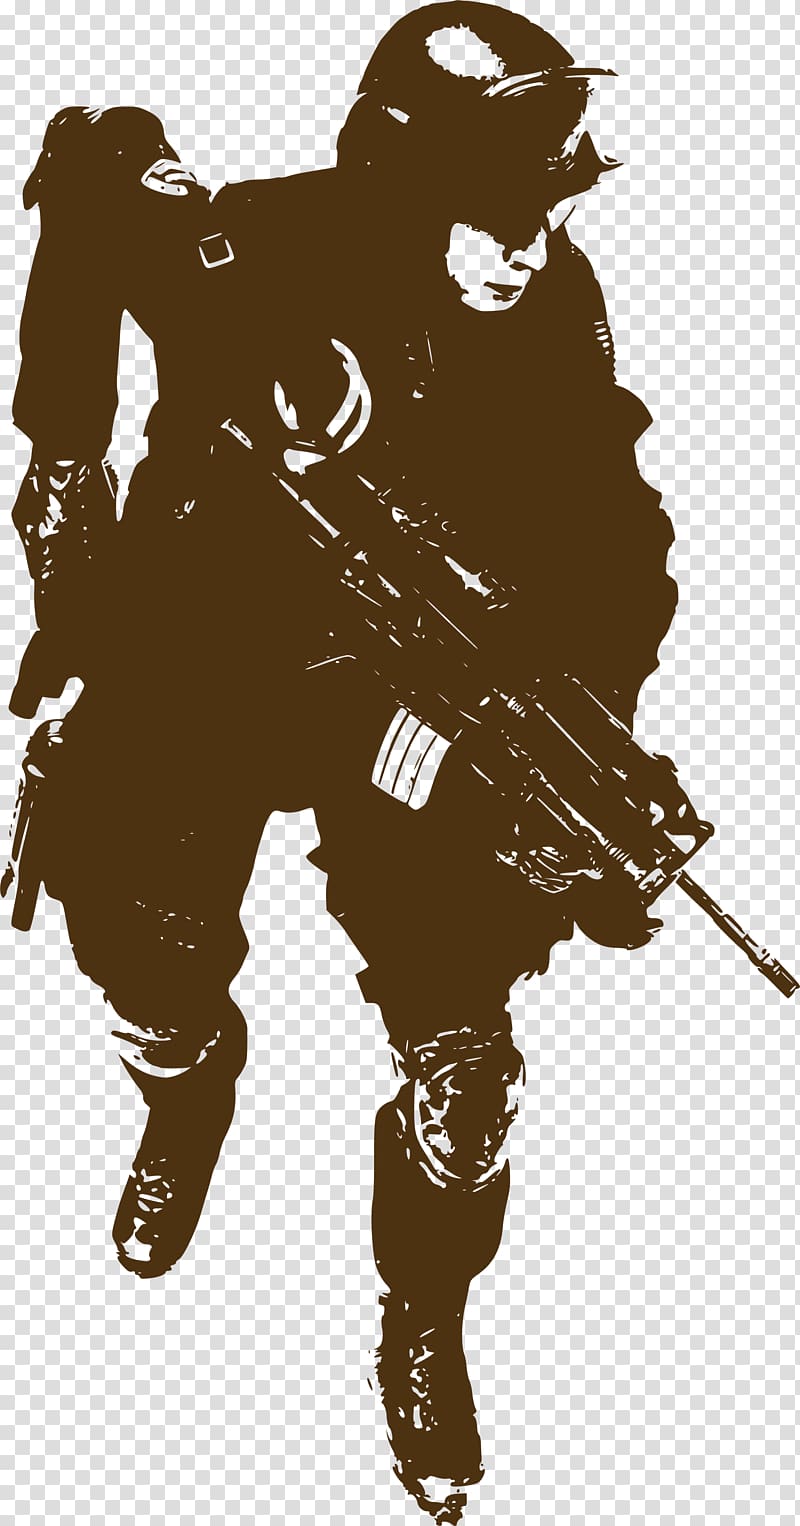 Soldier Sticker Military Decal, Brown line soldier transparent background PNG clipart